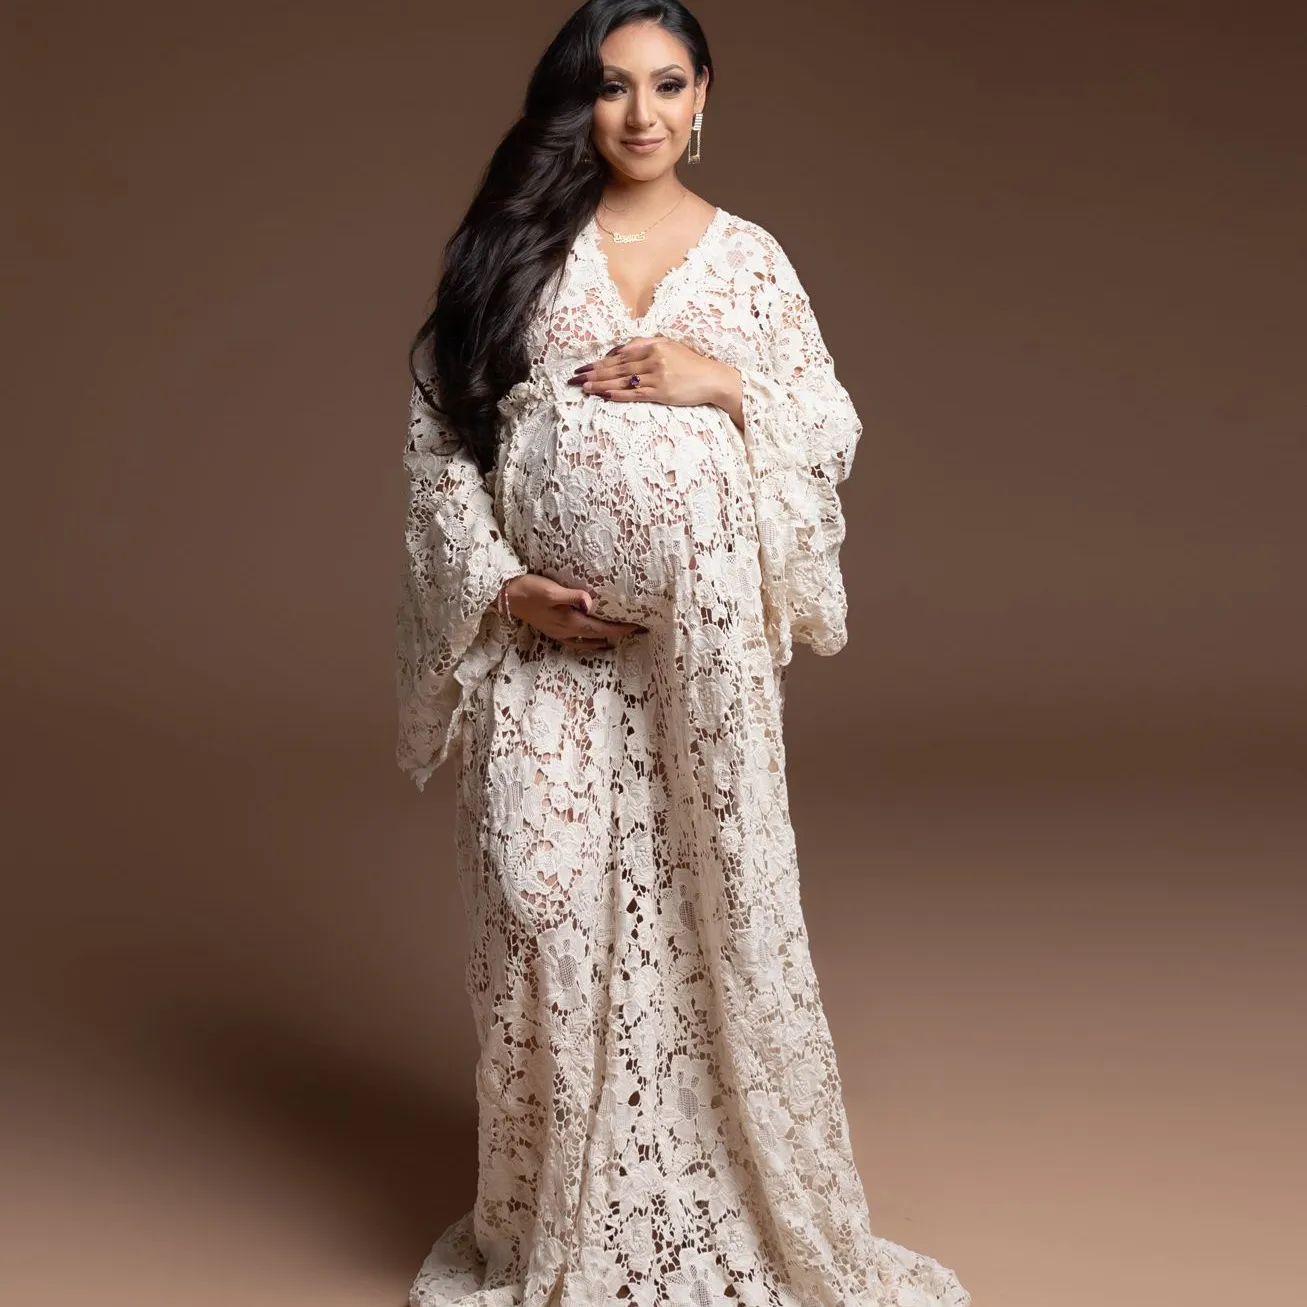 V Neck Pregnant Women's Prom Dress Maternity Lace Long Sleeve Robes for Photo Shoot or baby shower Luxury Plus Size Gowns